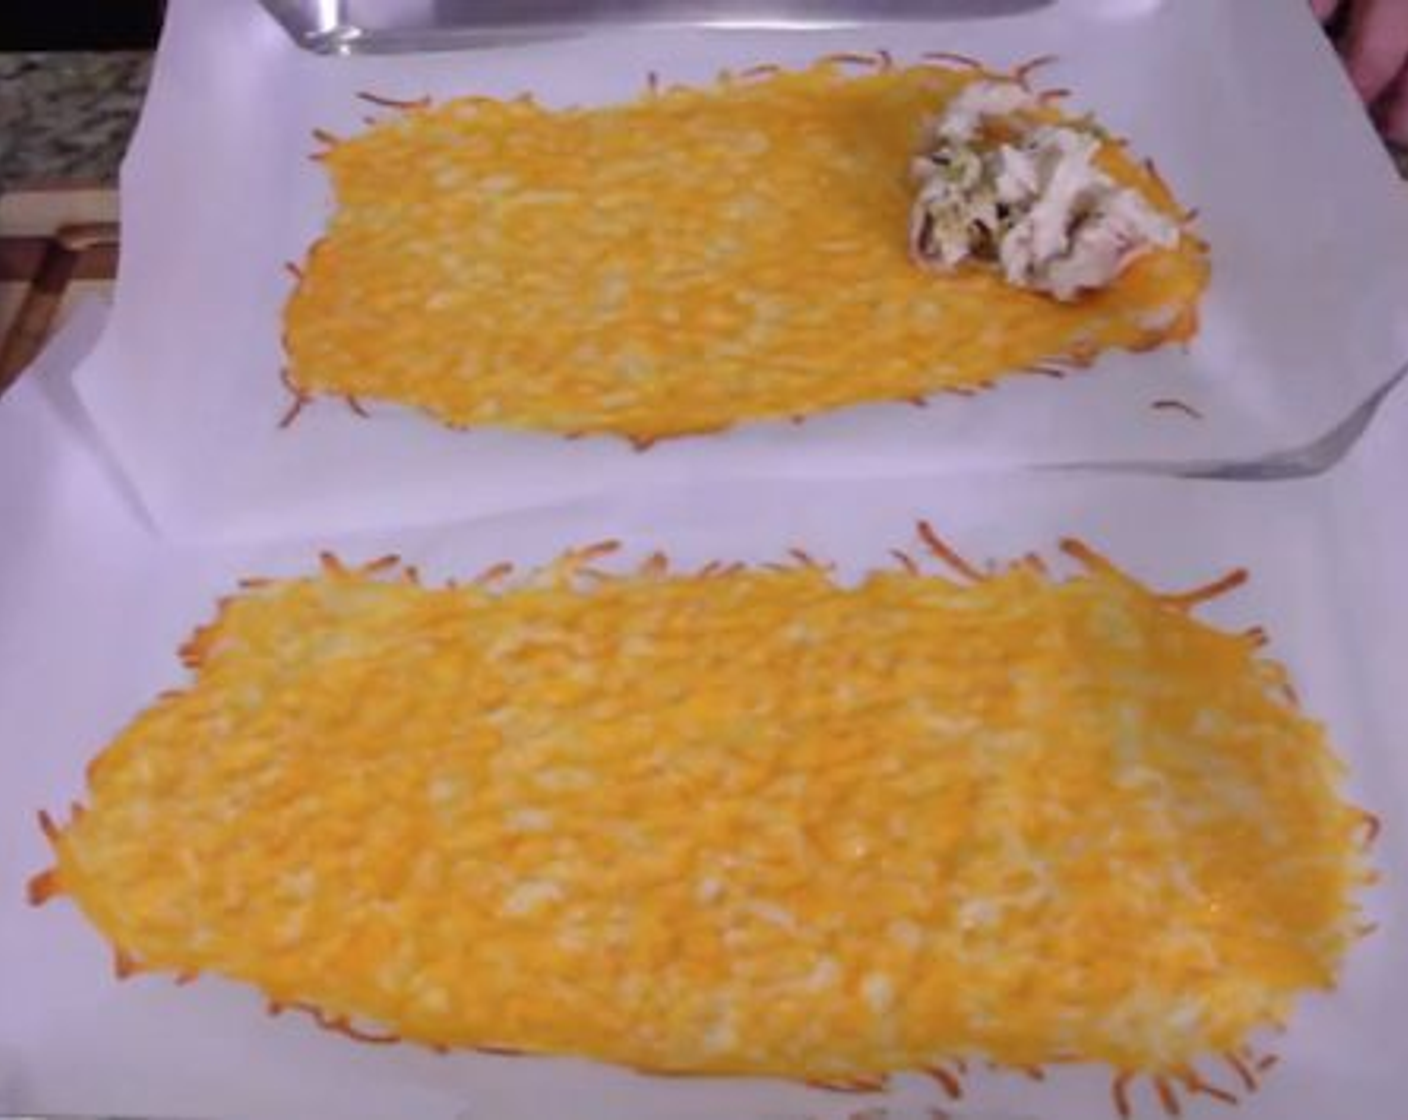 step 6 When the cheese is ready, remove from the oven and spoon the Chicken and Green Chili mixture into the Cheese near the edge that is closest to you. Roll the cheese carefully over the chicken to make a solid “tortilla”-style roll.